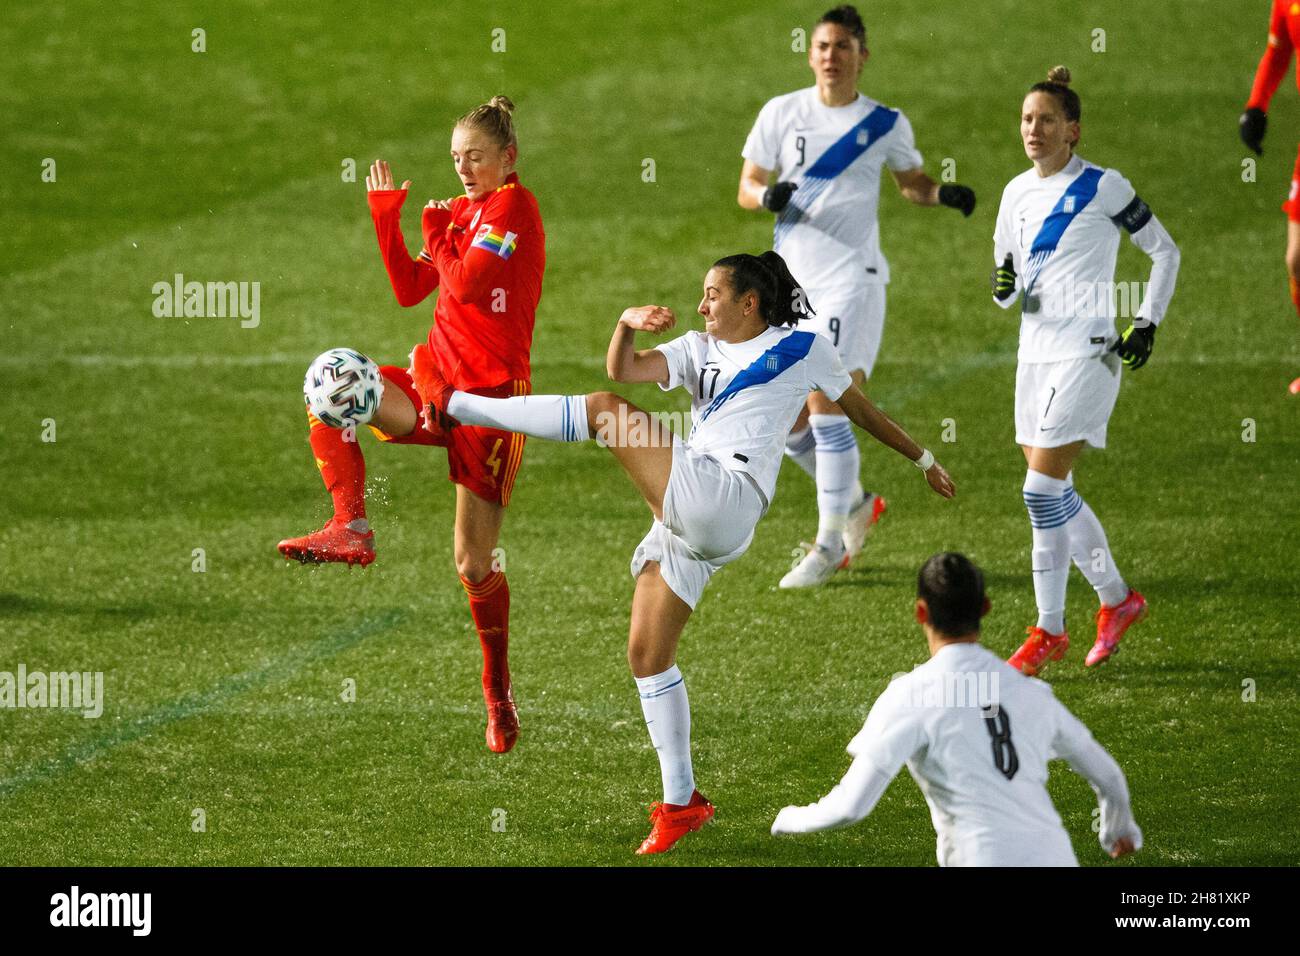 Llanelli, UK. 26 November, 2021. Athanasia Moraitou of Greece challenges Sophie Ingle of Wales during the Wales v Greece Women's World Cup Qualification match. Credit: Gruffydd Thomas/Alamy Stock Photo